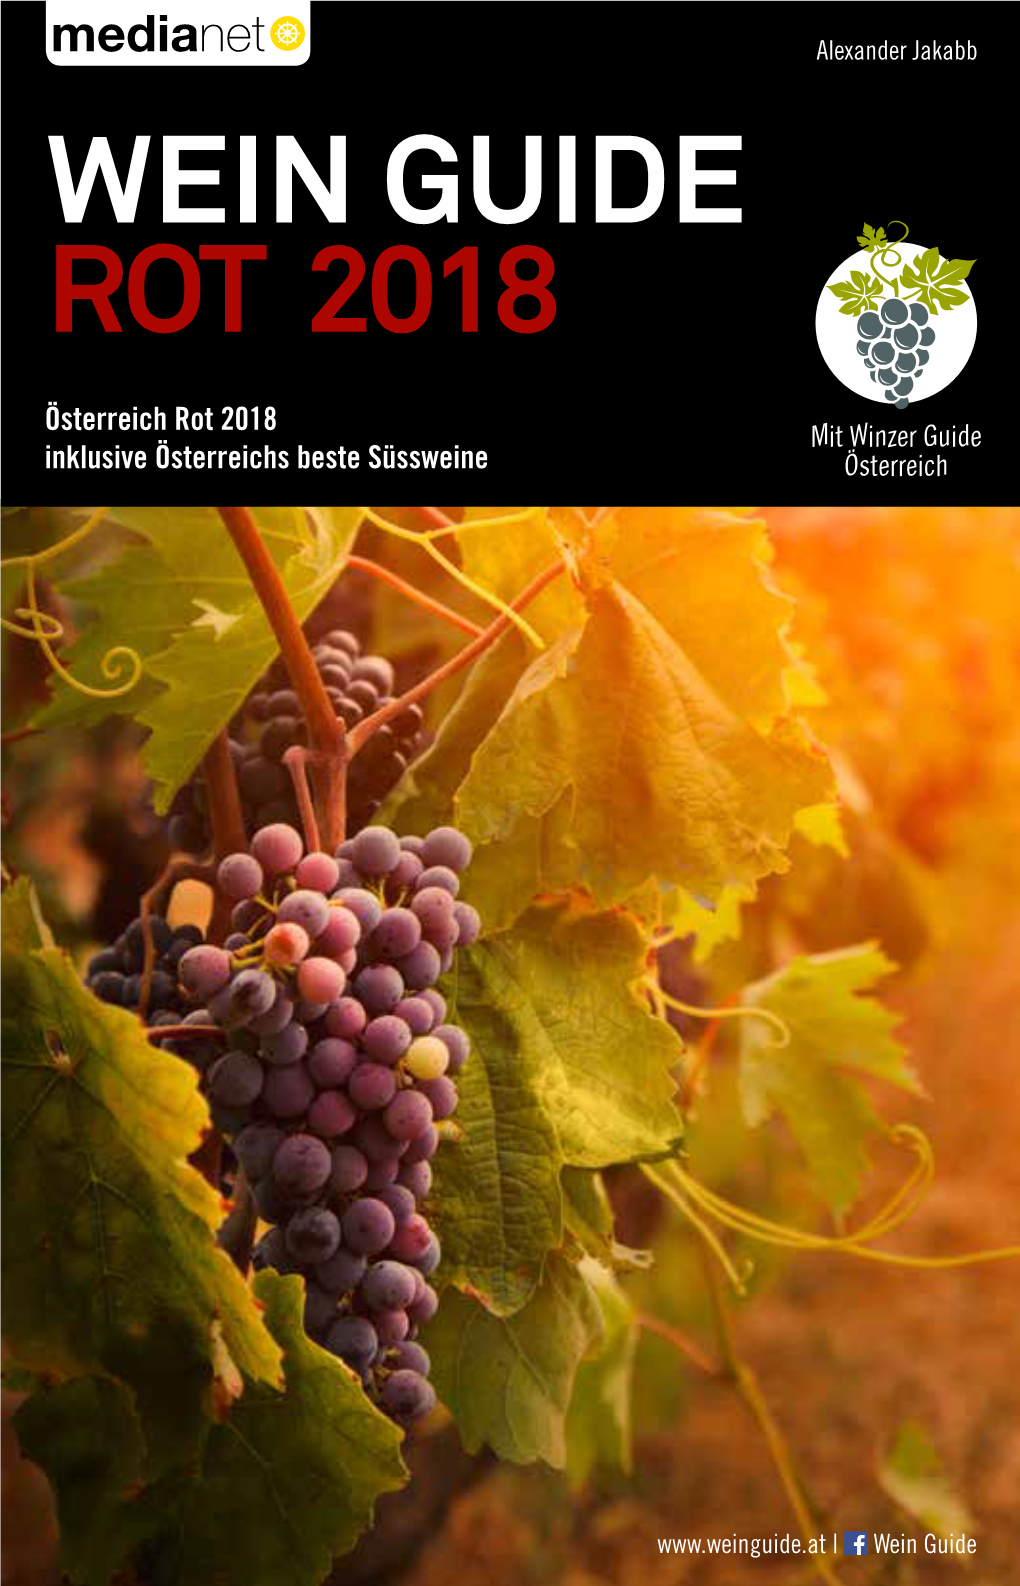 Wein Guide ROT 2018